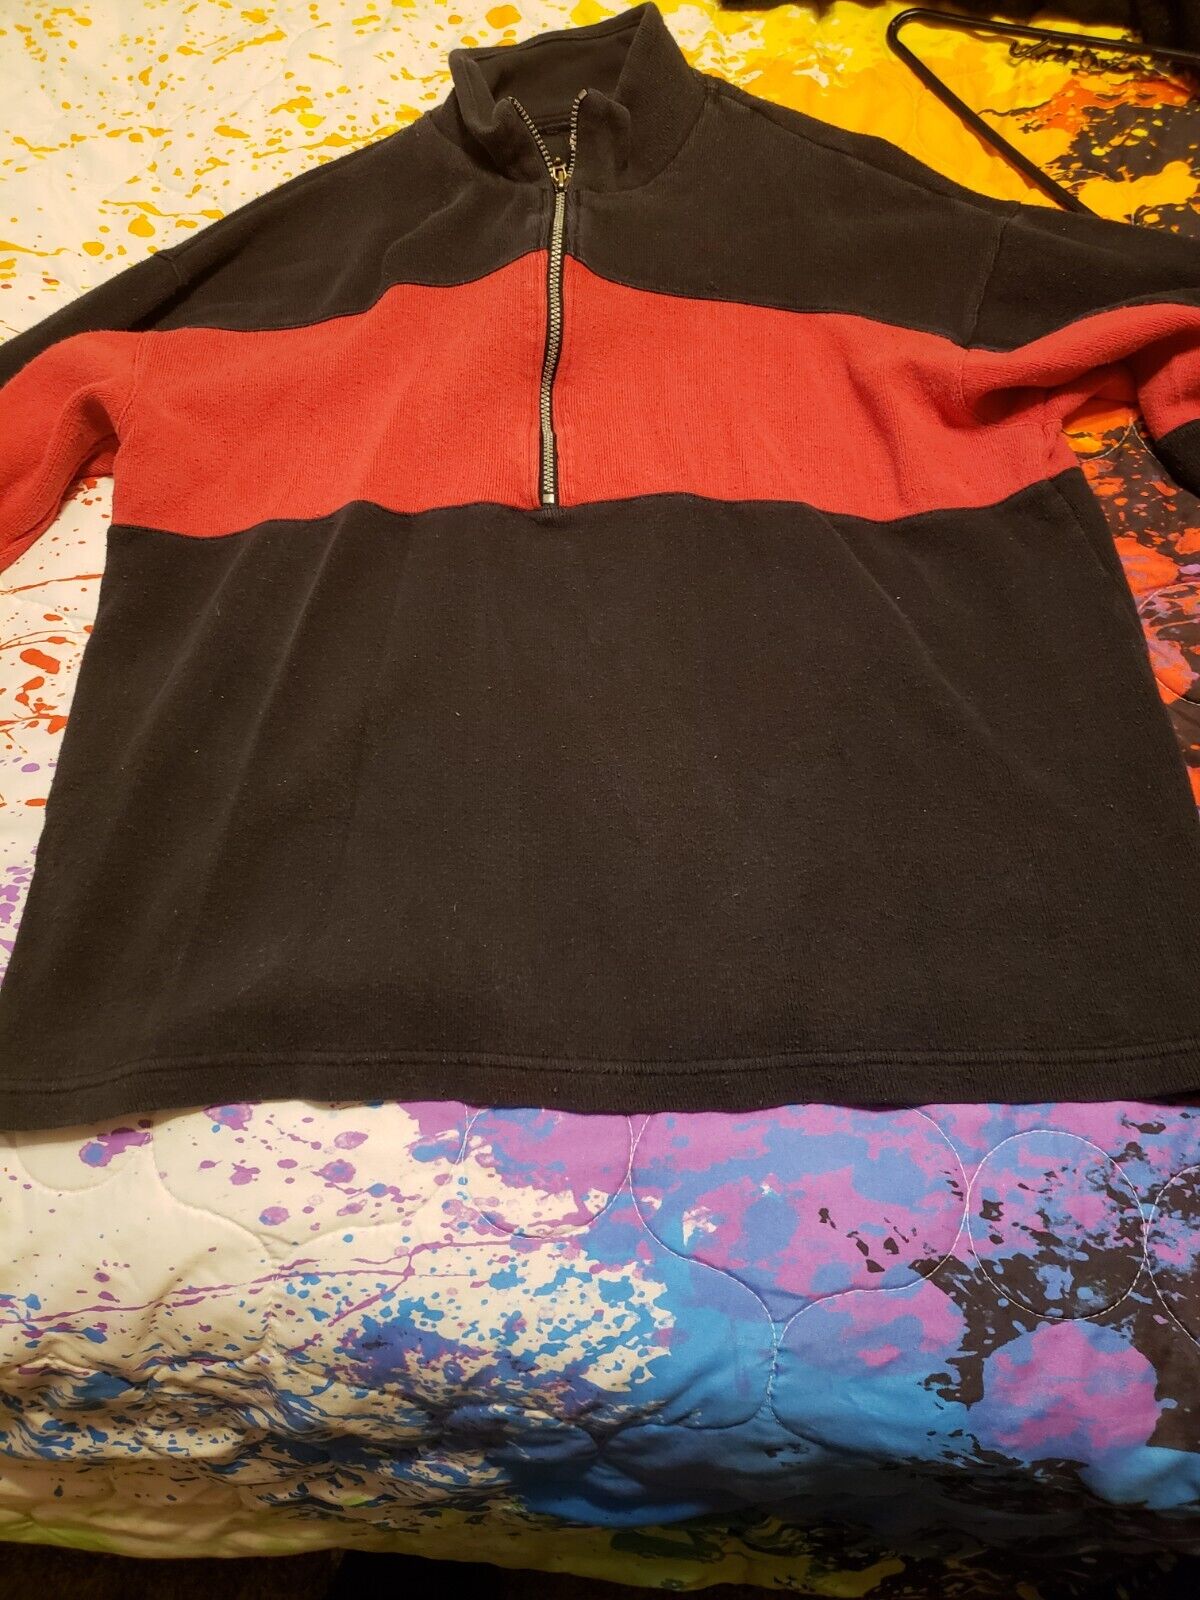 Marlboro Black and Red Pullover Large - image 1